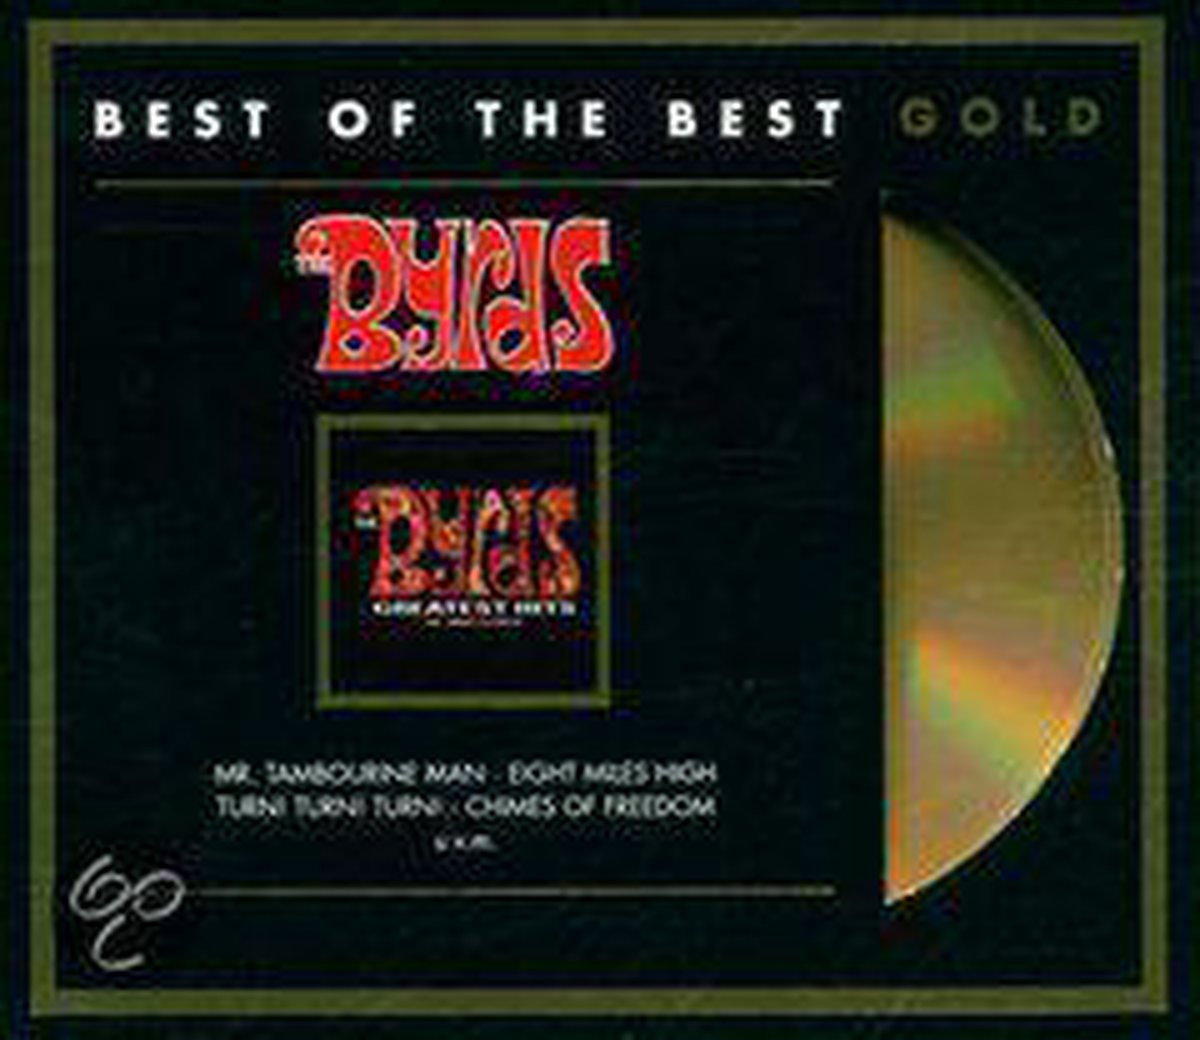 Byrds' Greatest Hits - The Byrds